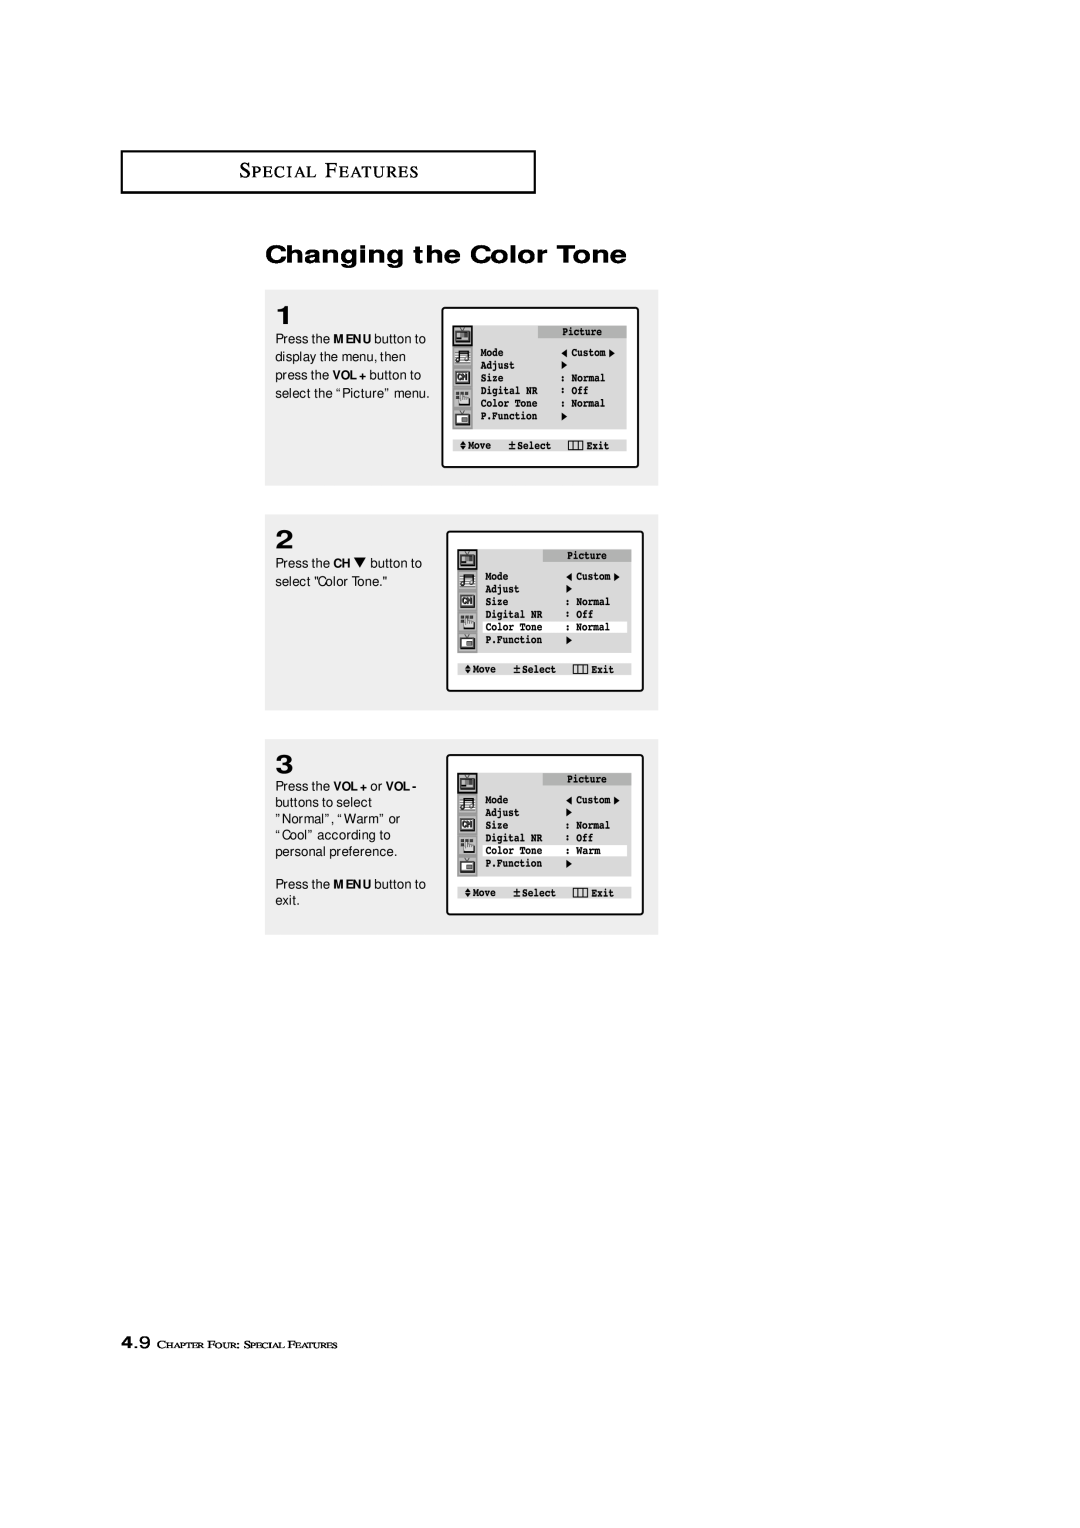 Samsung TXM 2798HF manual Changing the Color Tone, S P E C I A L F E At U R E S, Press the CH button to select Color Tone 